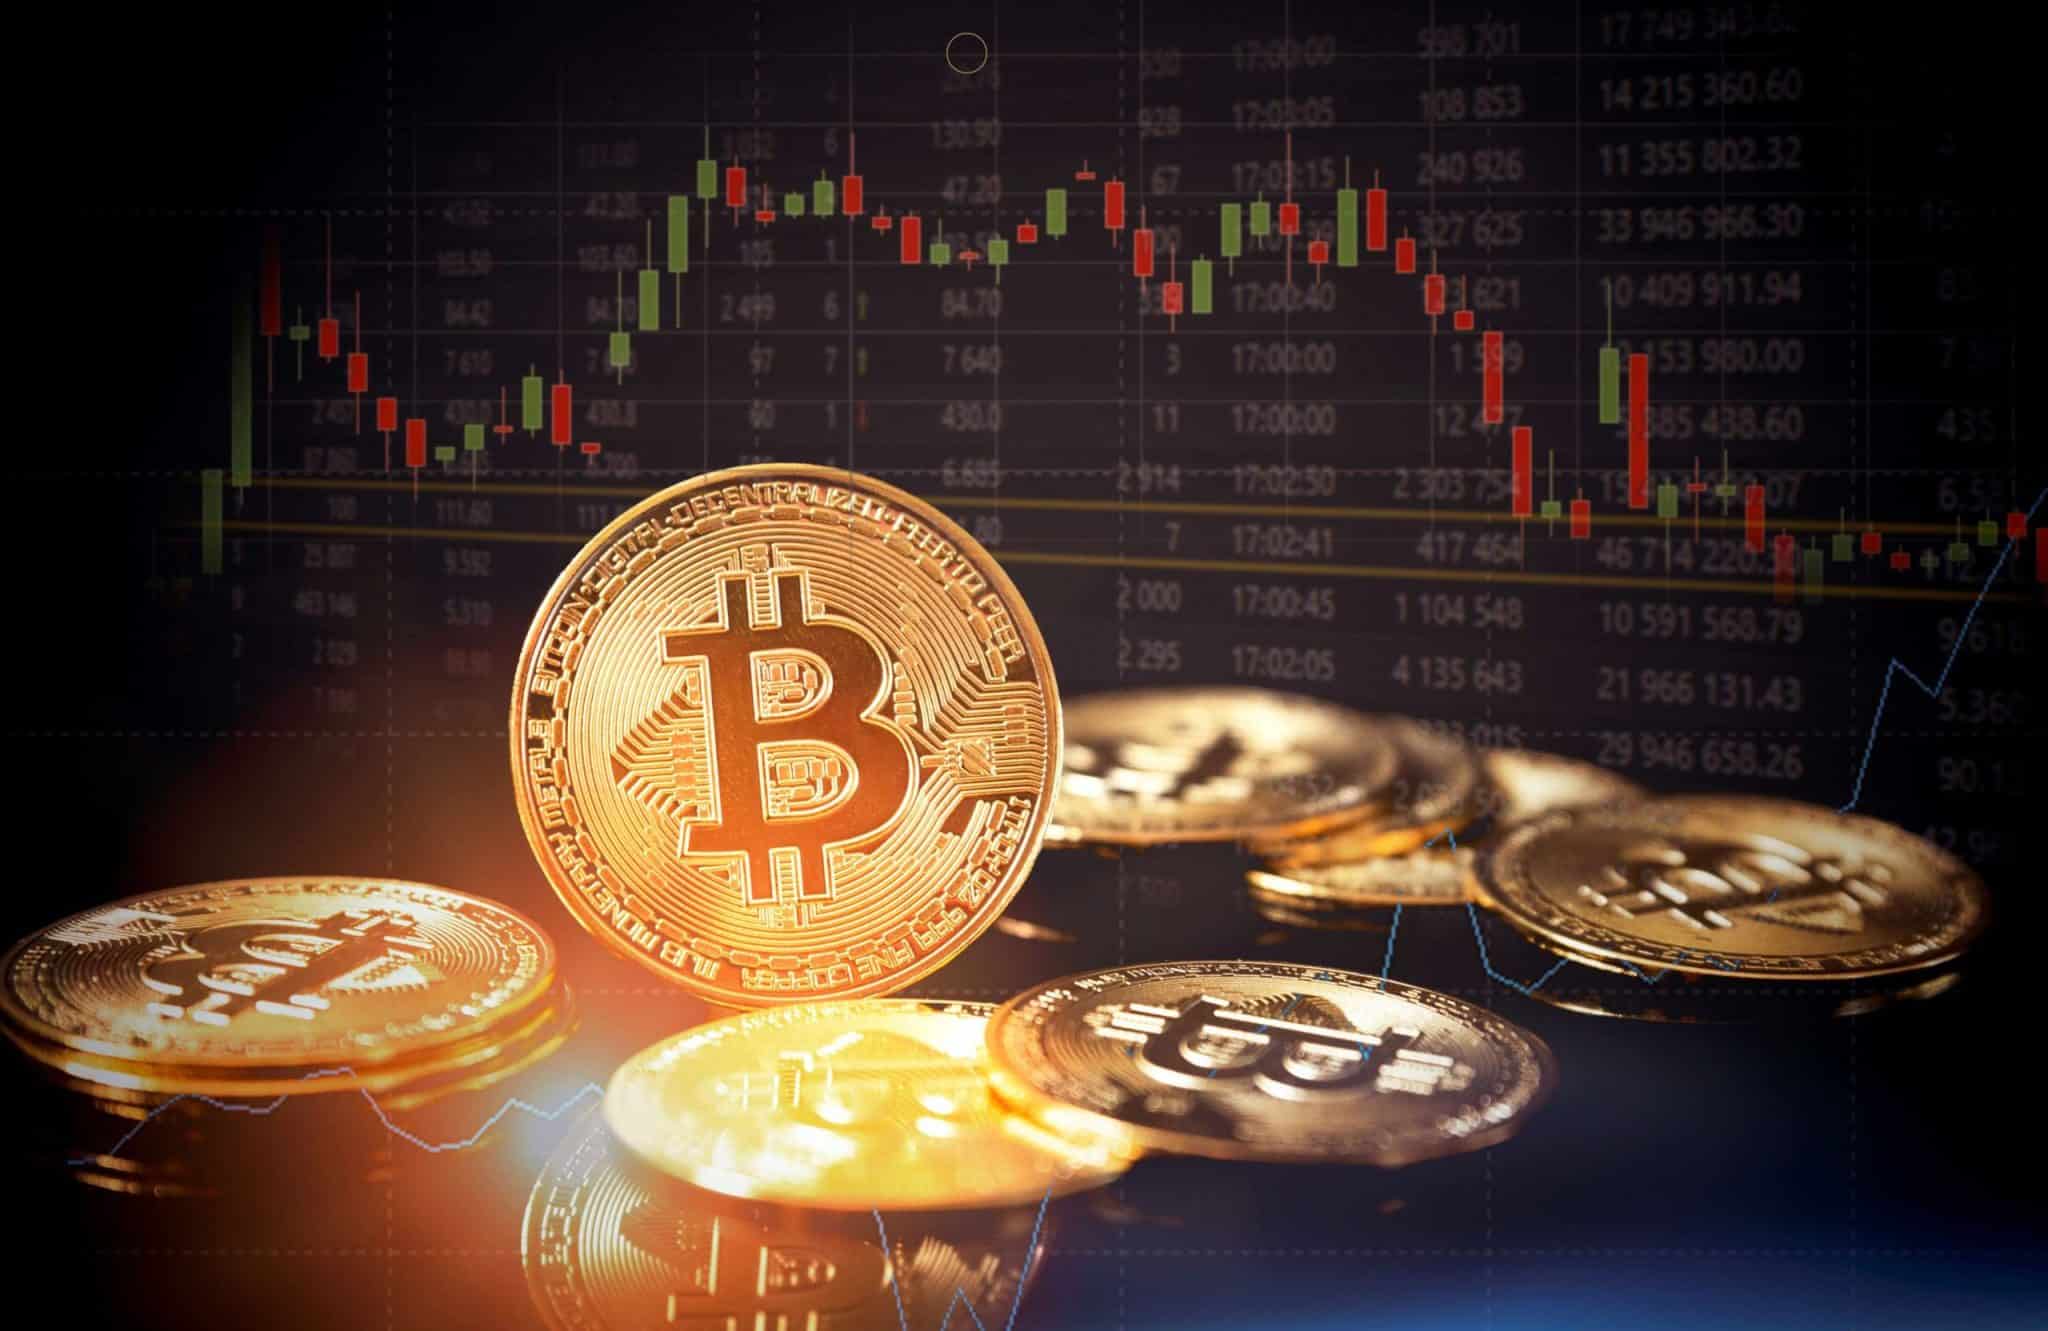 Find out how the expiration of Bitcoin options and crypto options worth $8.12 billion could influence the crypto market. Stay informed about potential price action.